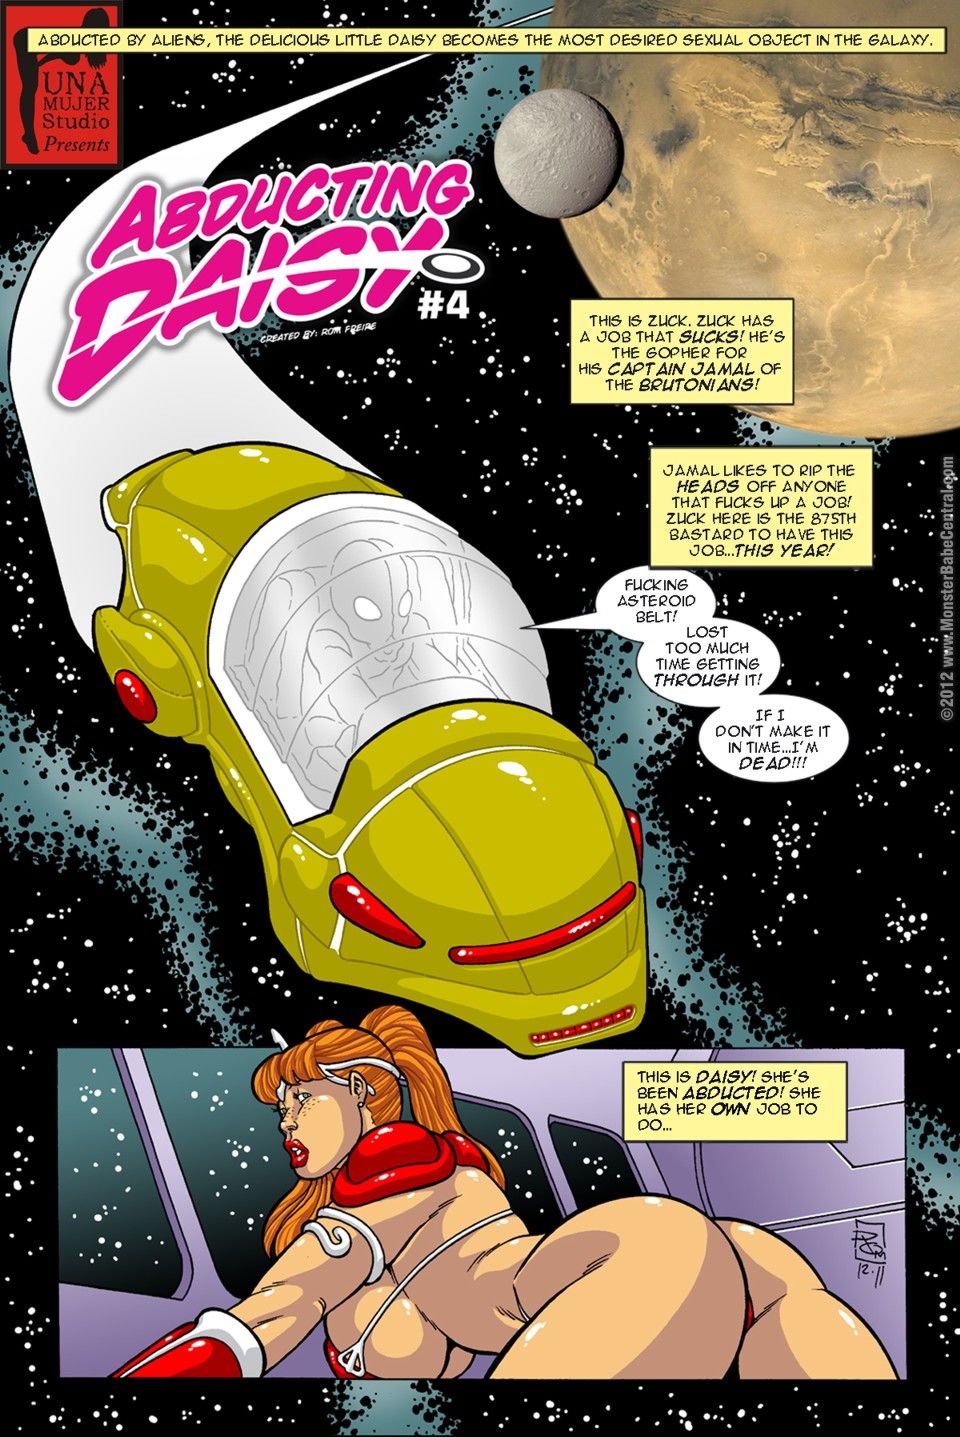 MonsterBabeCentral- Abducting Daisy 3-4 page 1